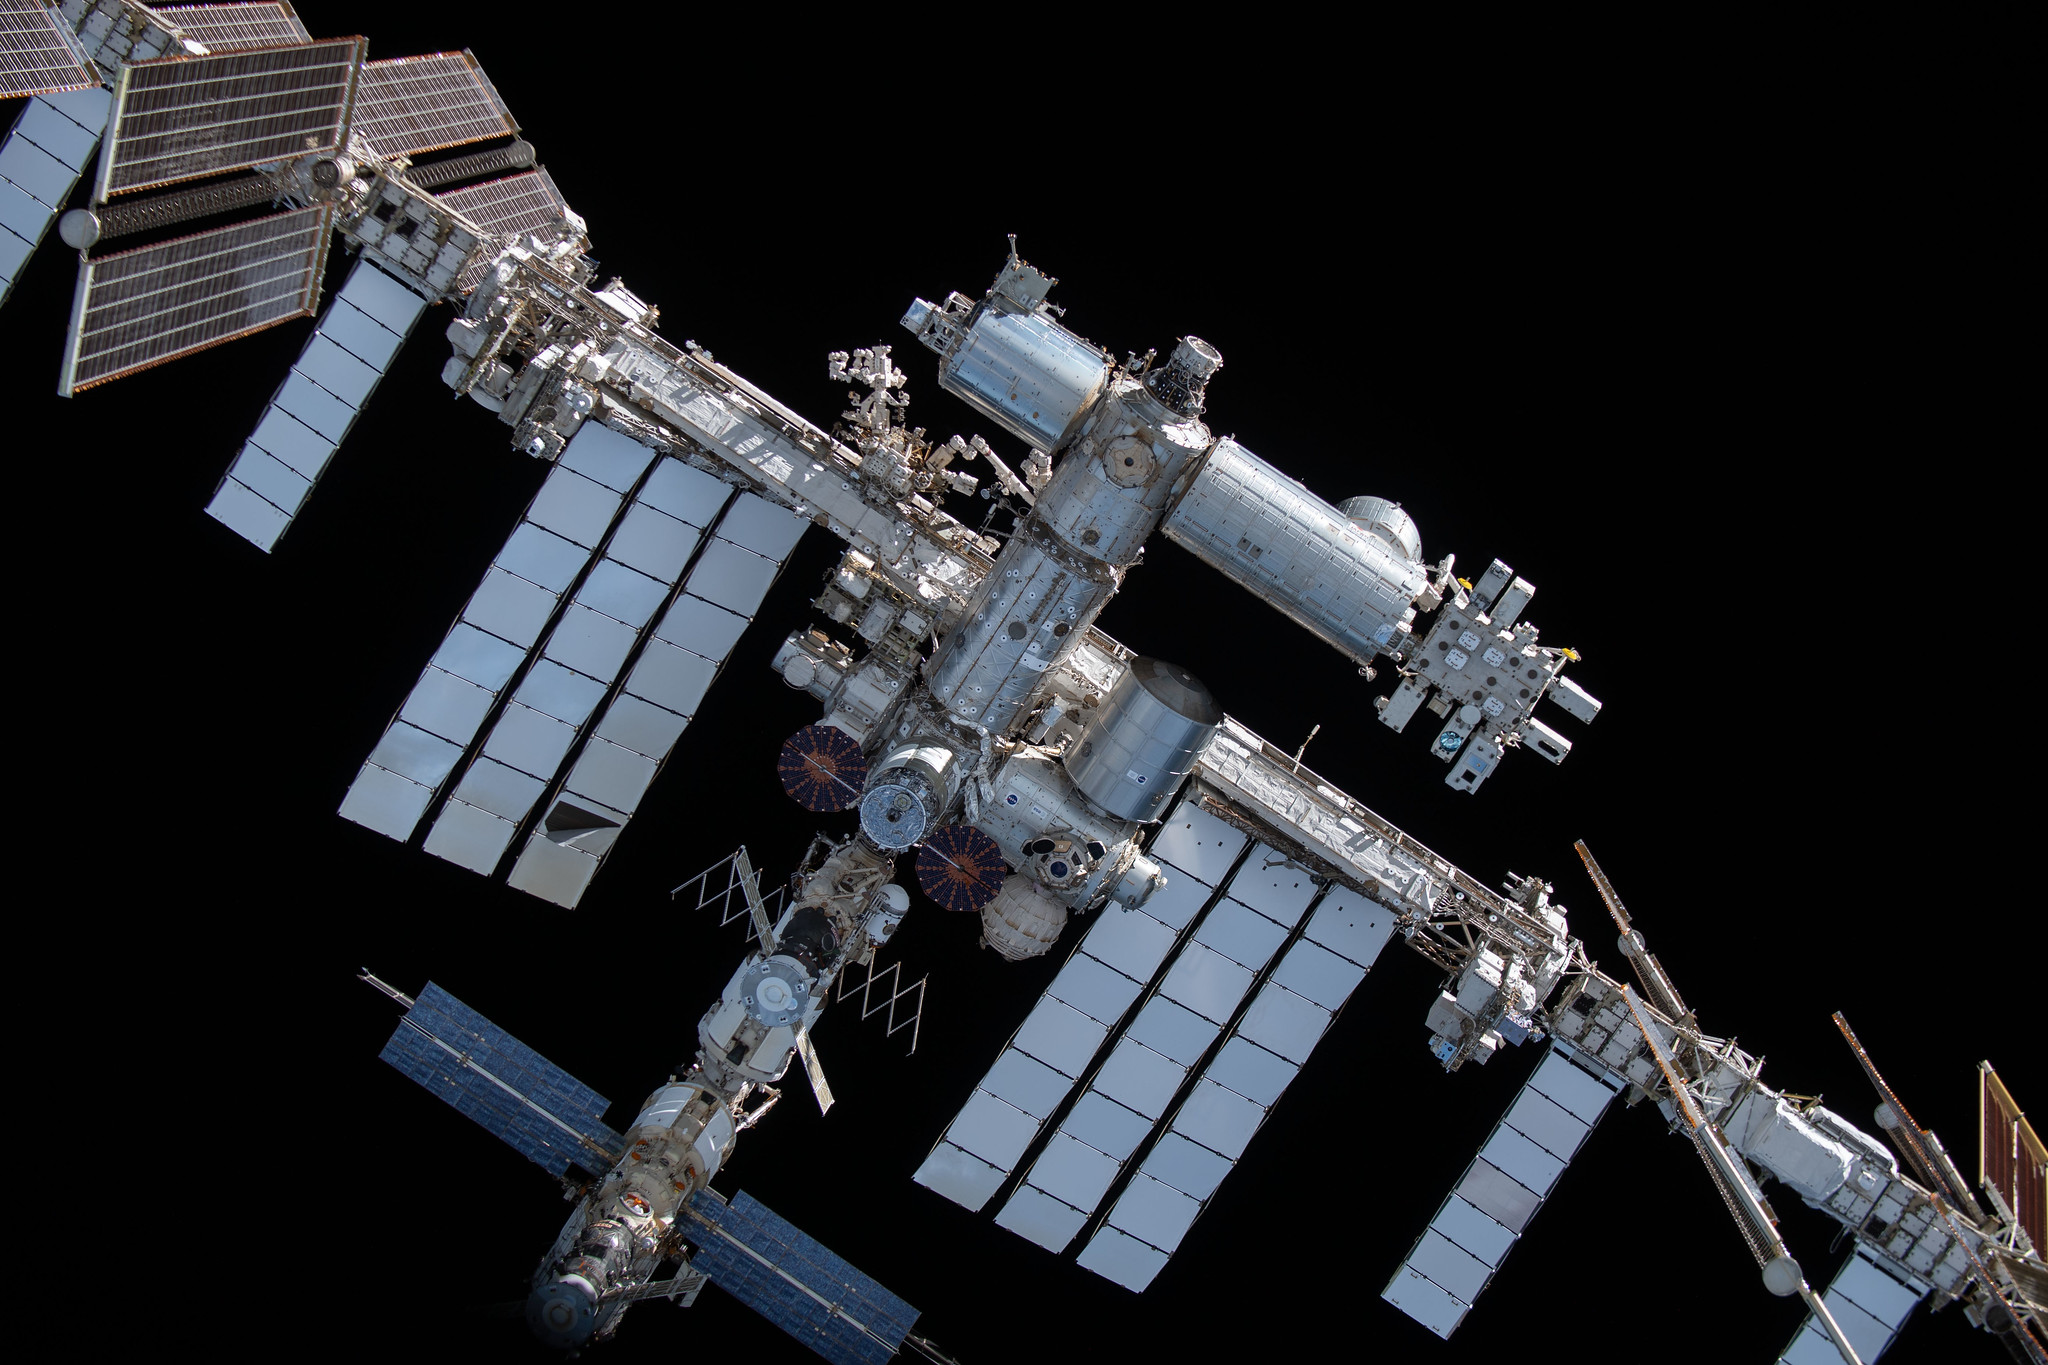 The International Space Station, pictured from the SpaceX Crew Dragon Endeavour.